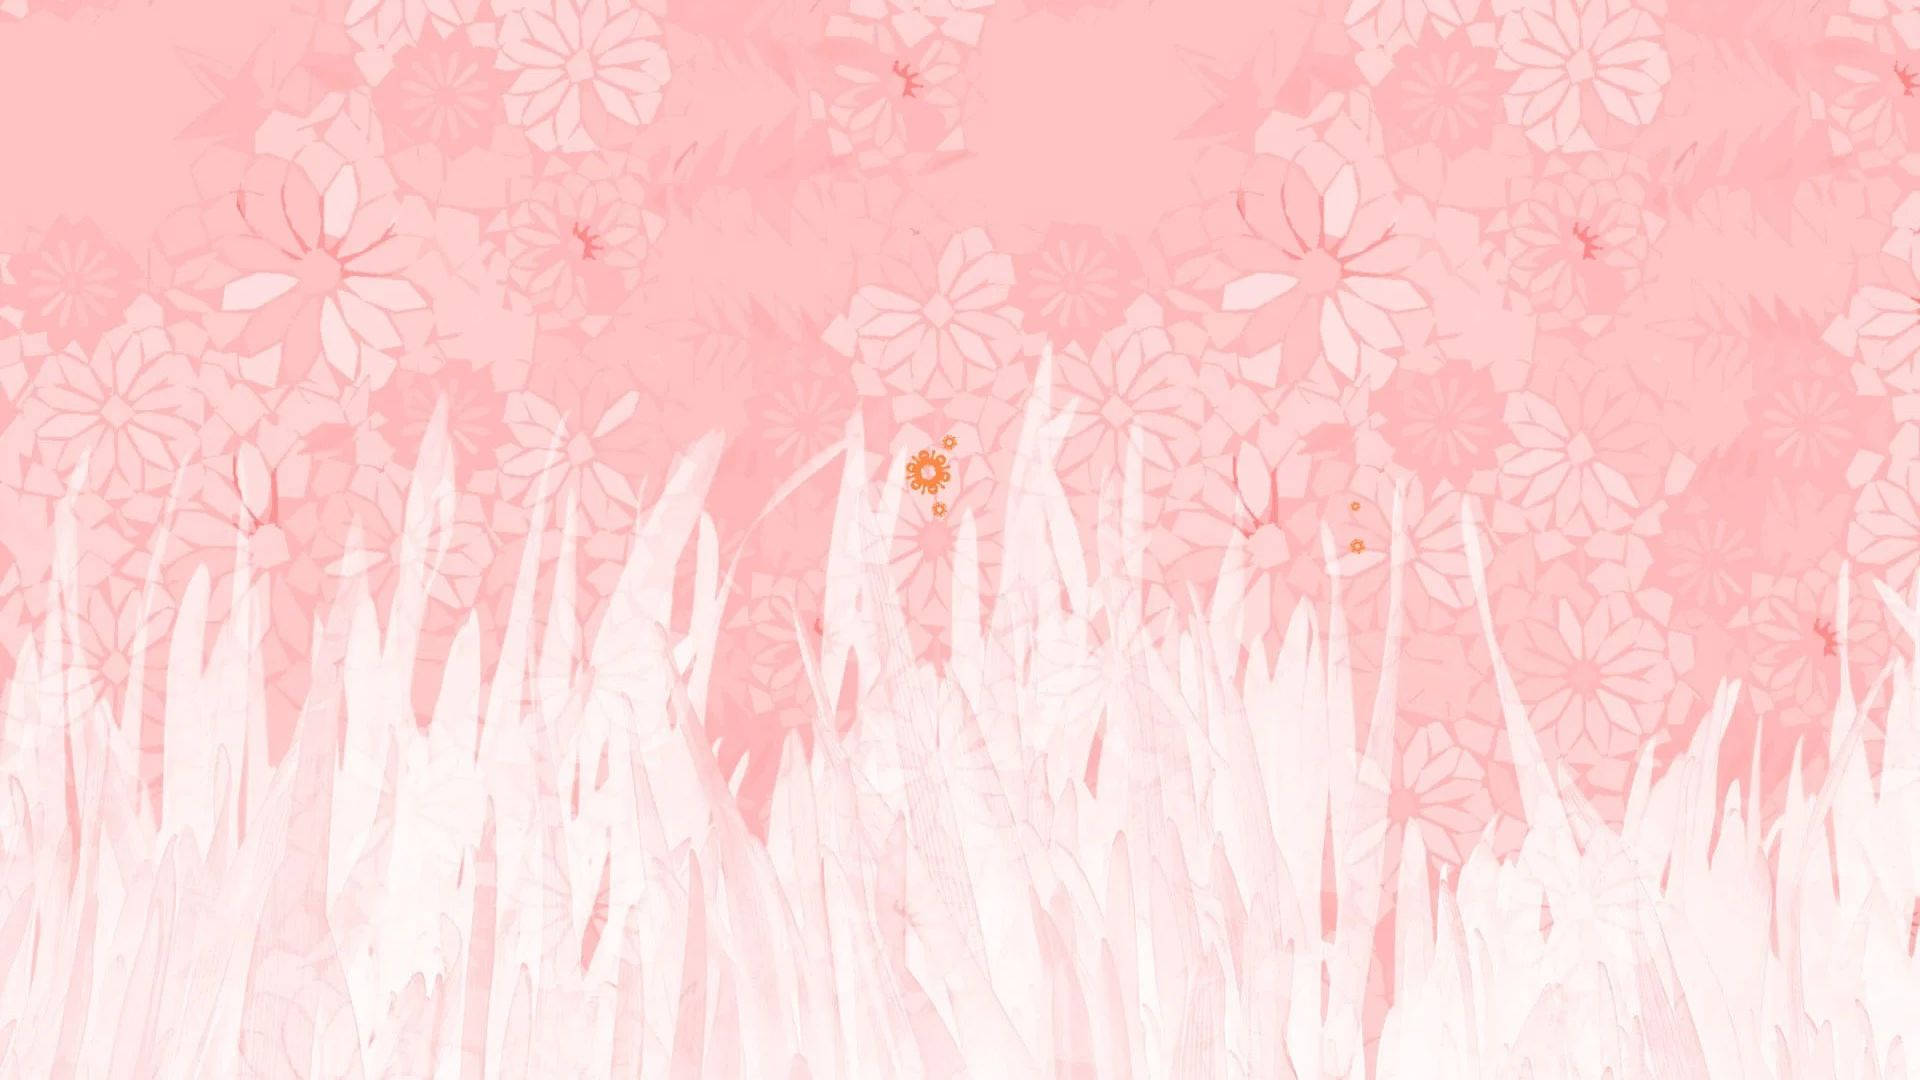 Aesthetic Pink Grass And Flowers Background